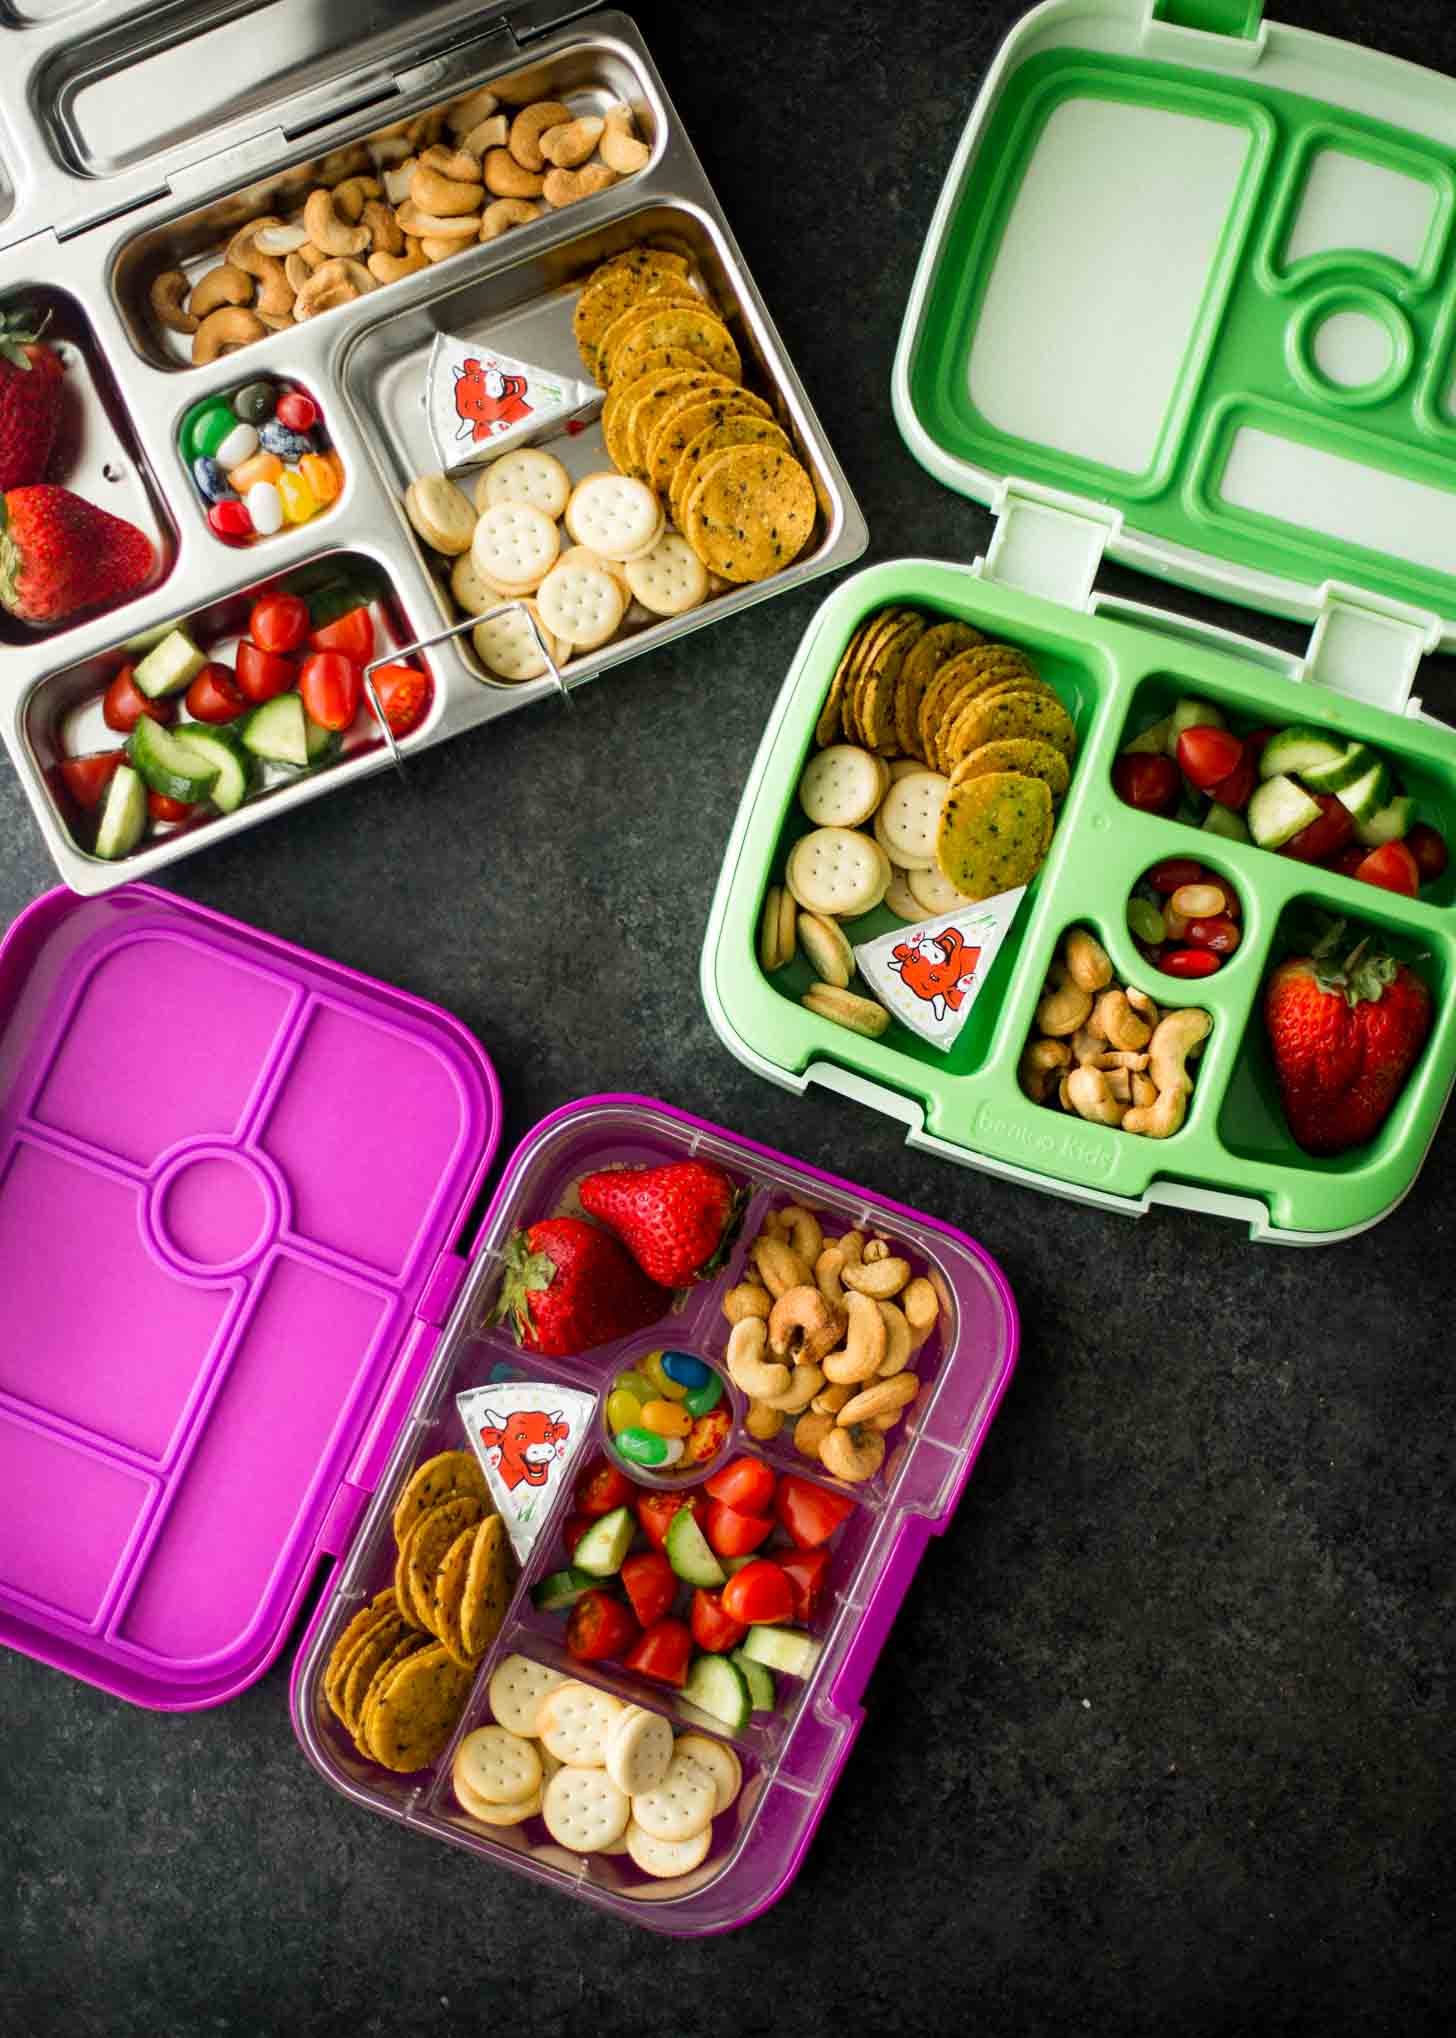 Best Lunch Boxes for Kids | Inquiring Chef